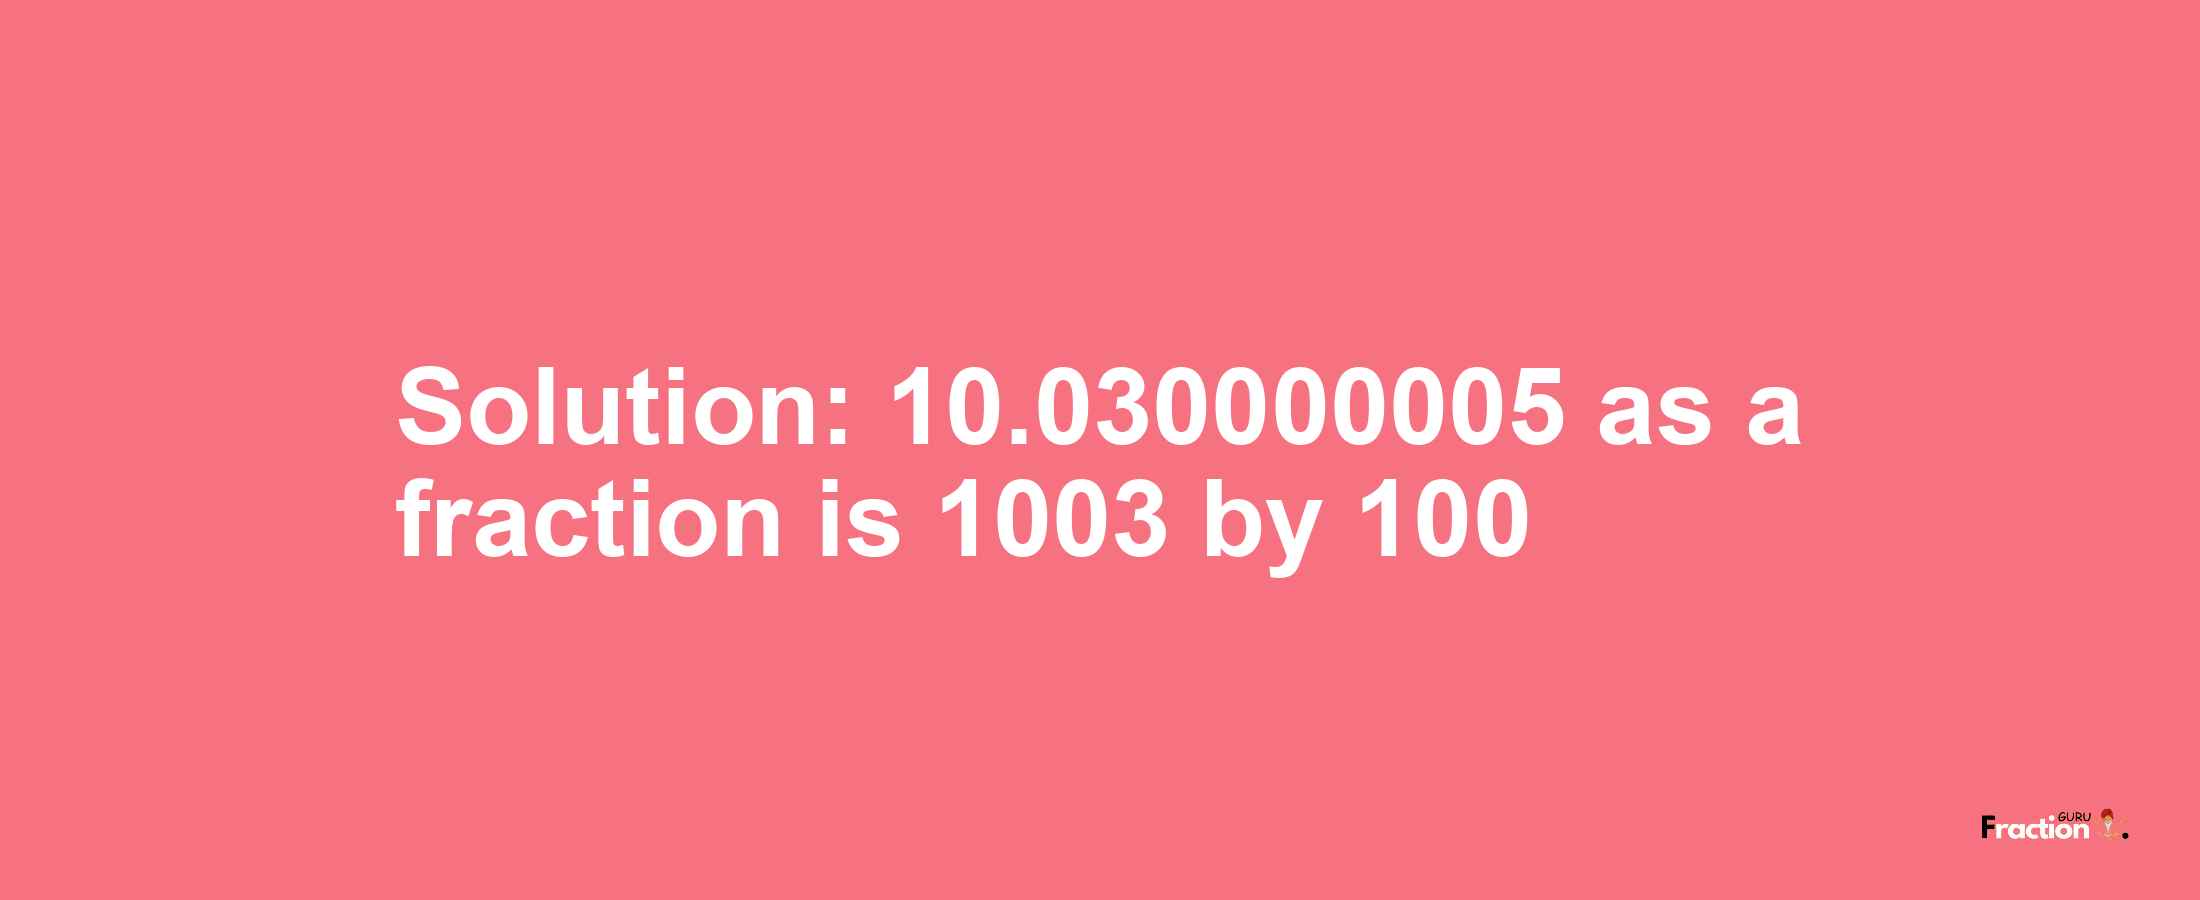 Solution:10.030000005 as a fraction is 1003/100